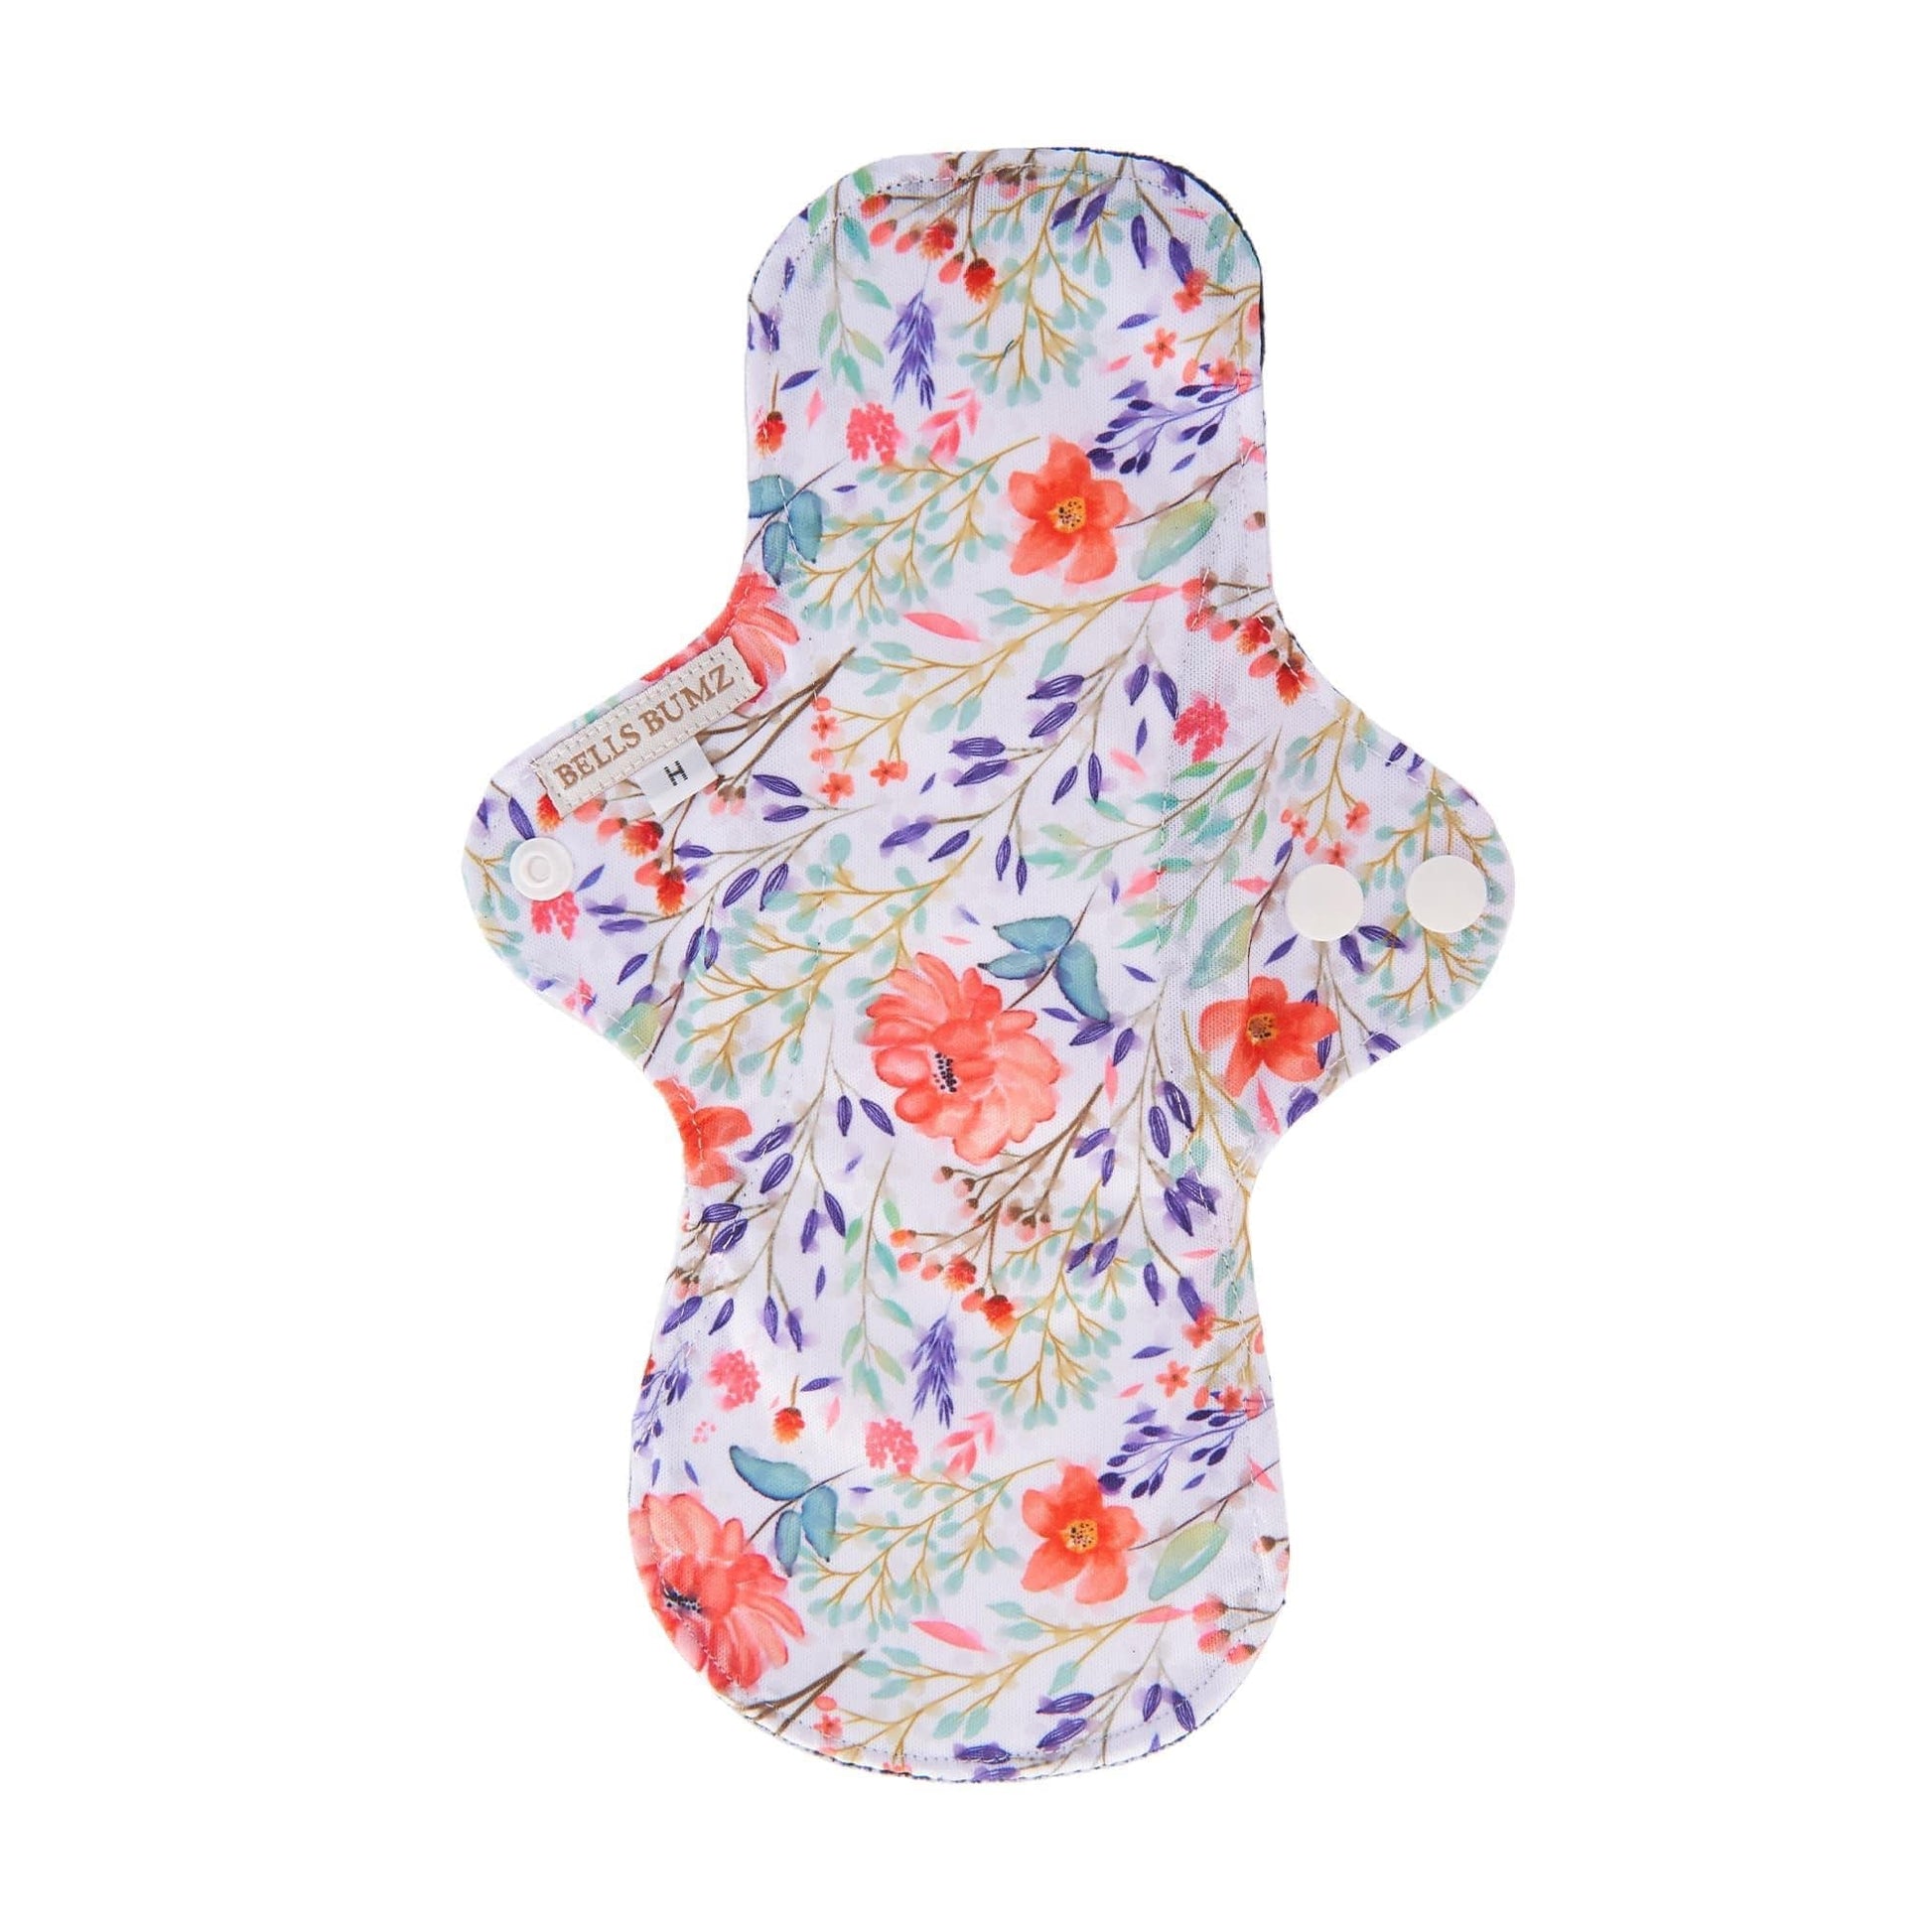 Image shows a reusable cloth sanitary pad in a pink flower print.